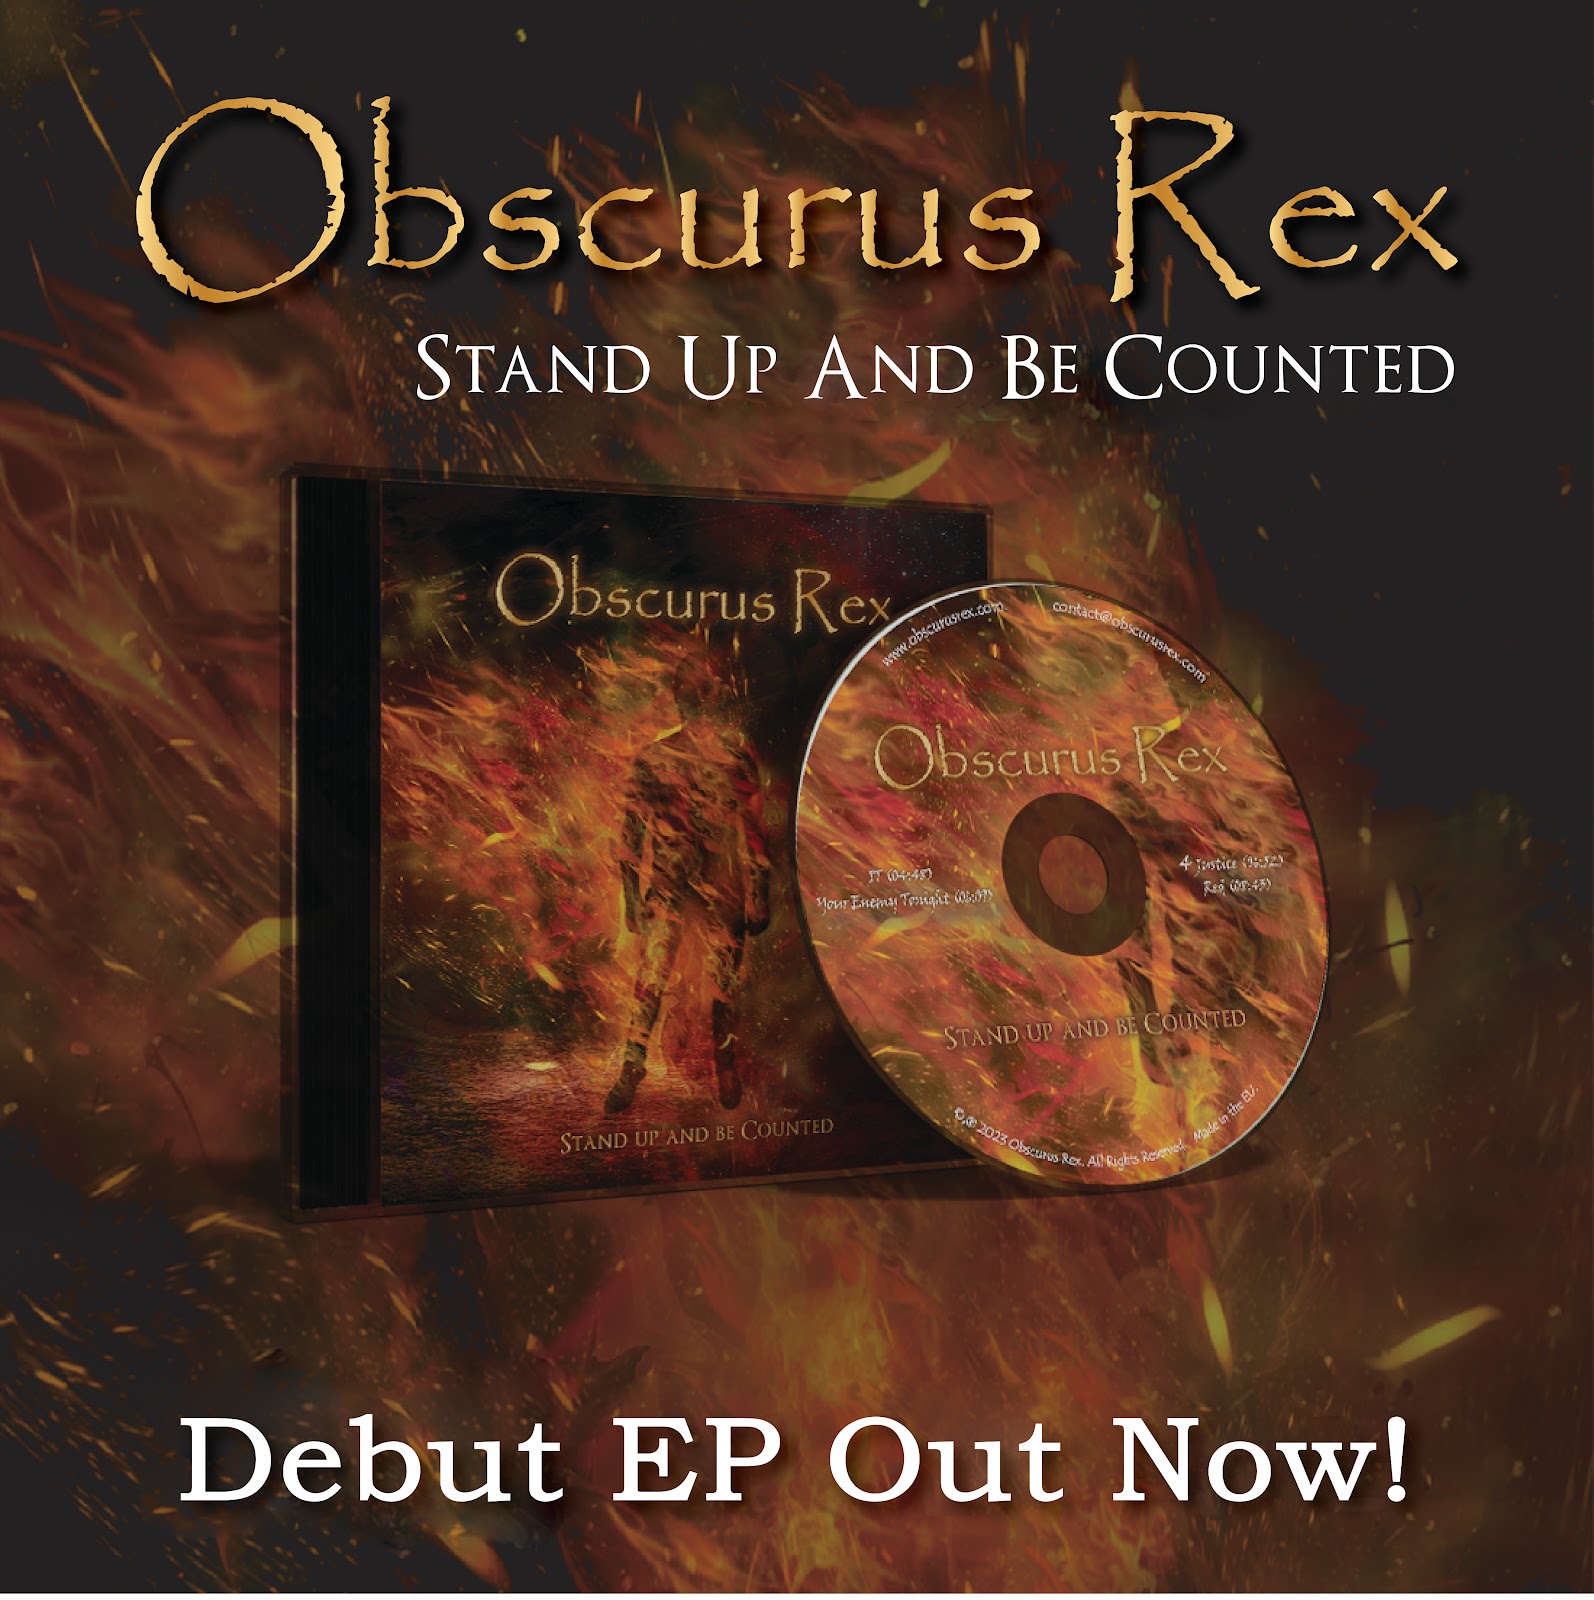 OBSCURUS REX DEBUT EP OUT NOW